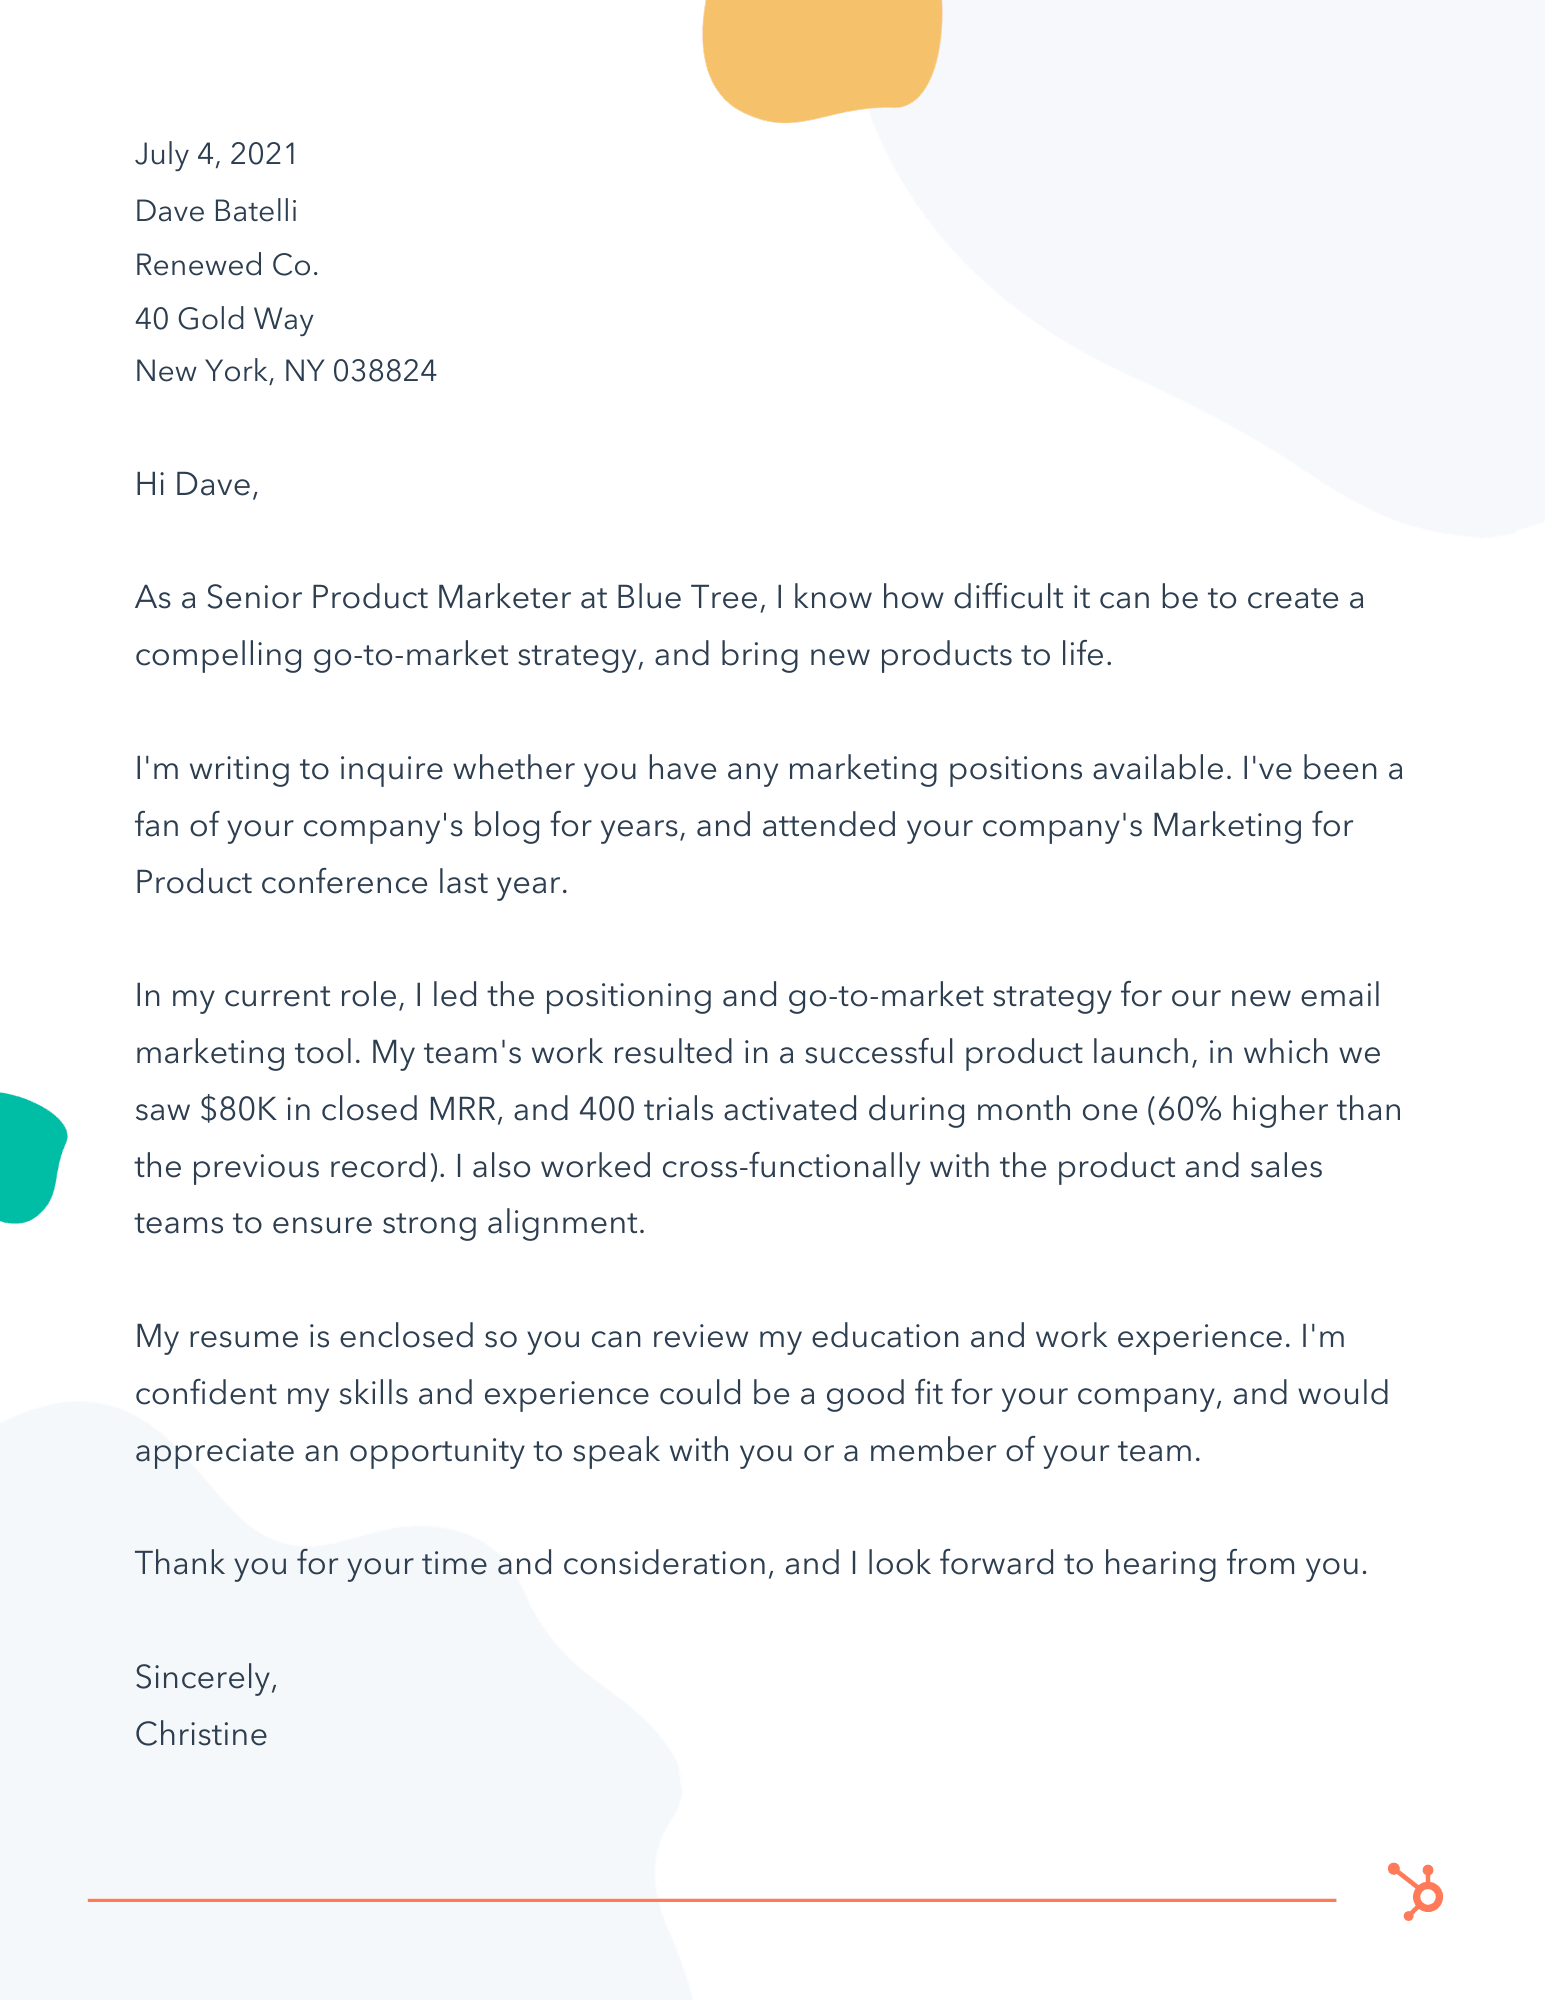 How to Write a Letter of Interest in 26 [Examples + Template]